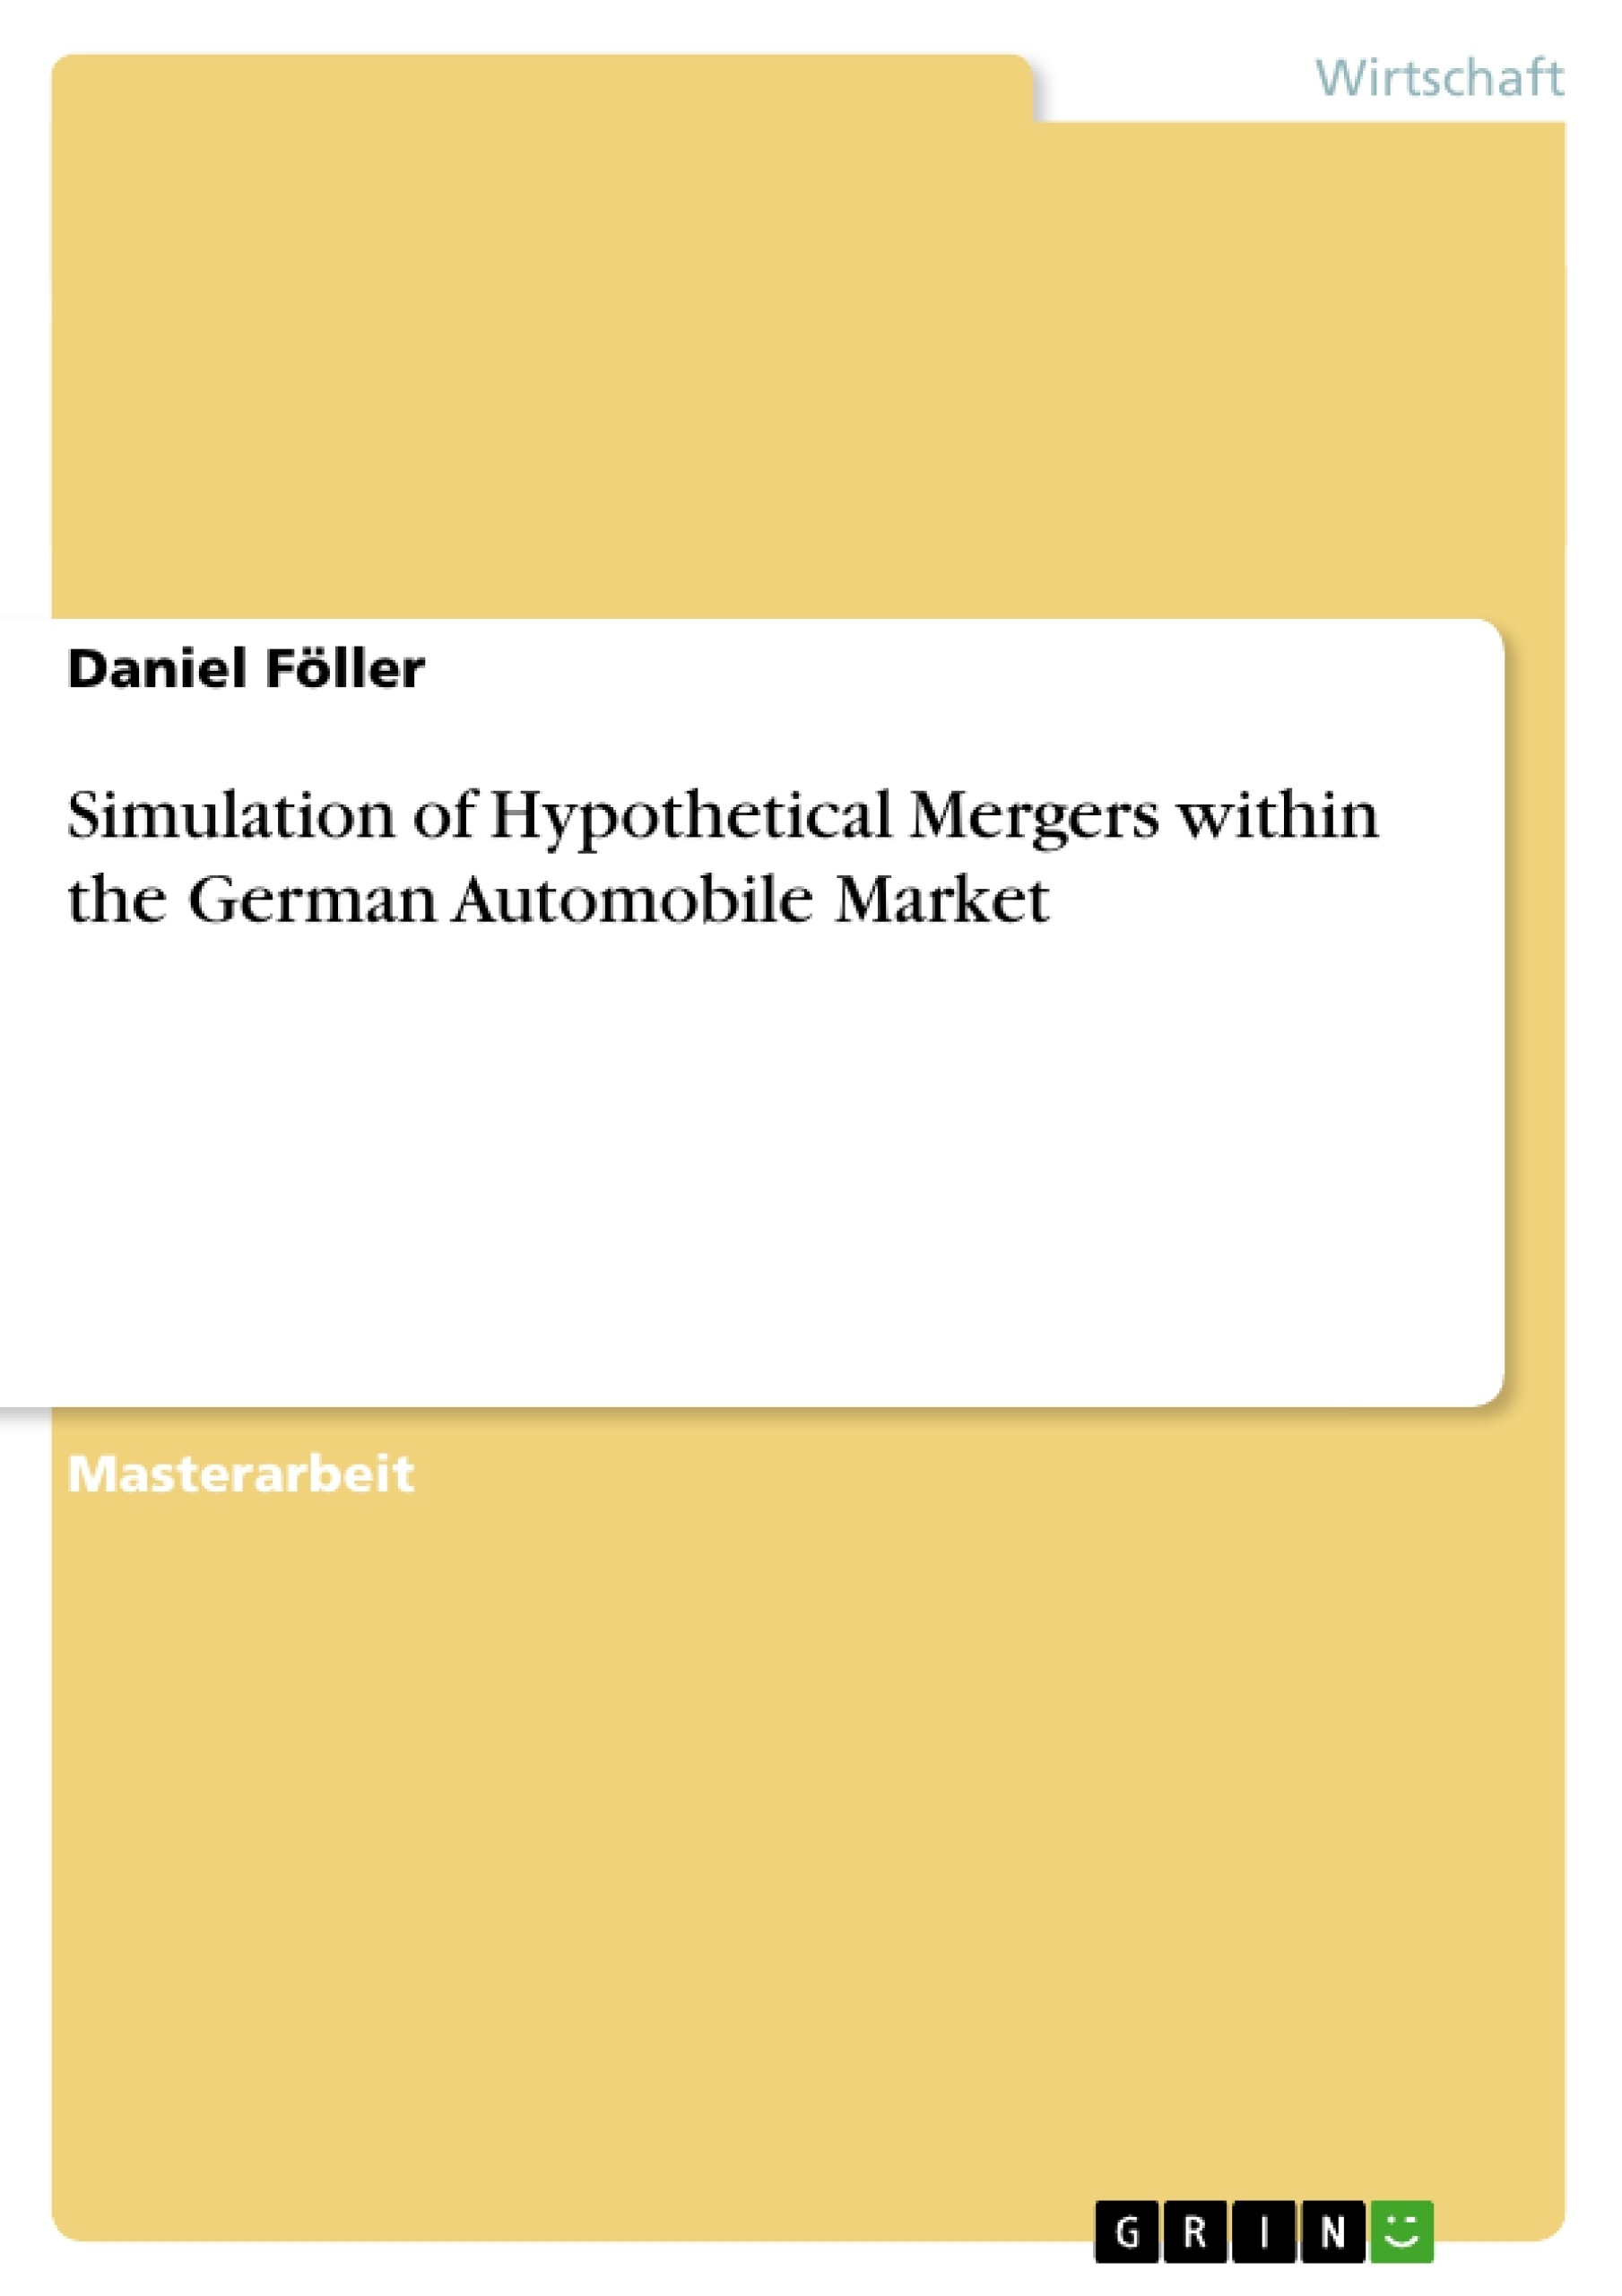 Título: Simulation of Hypothetical Mergers within the German Automobile Market